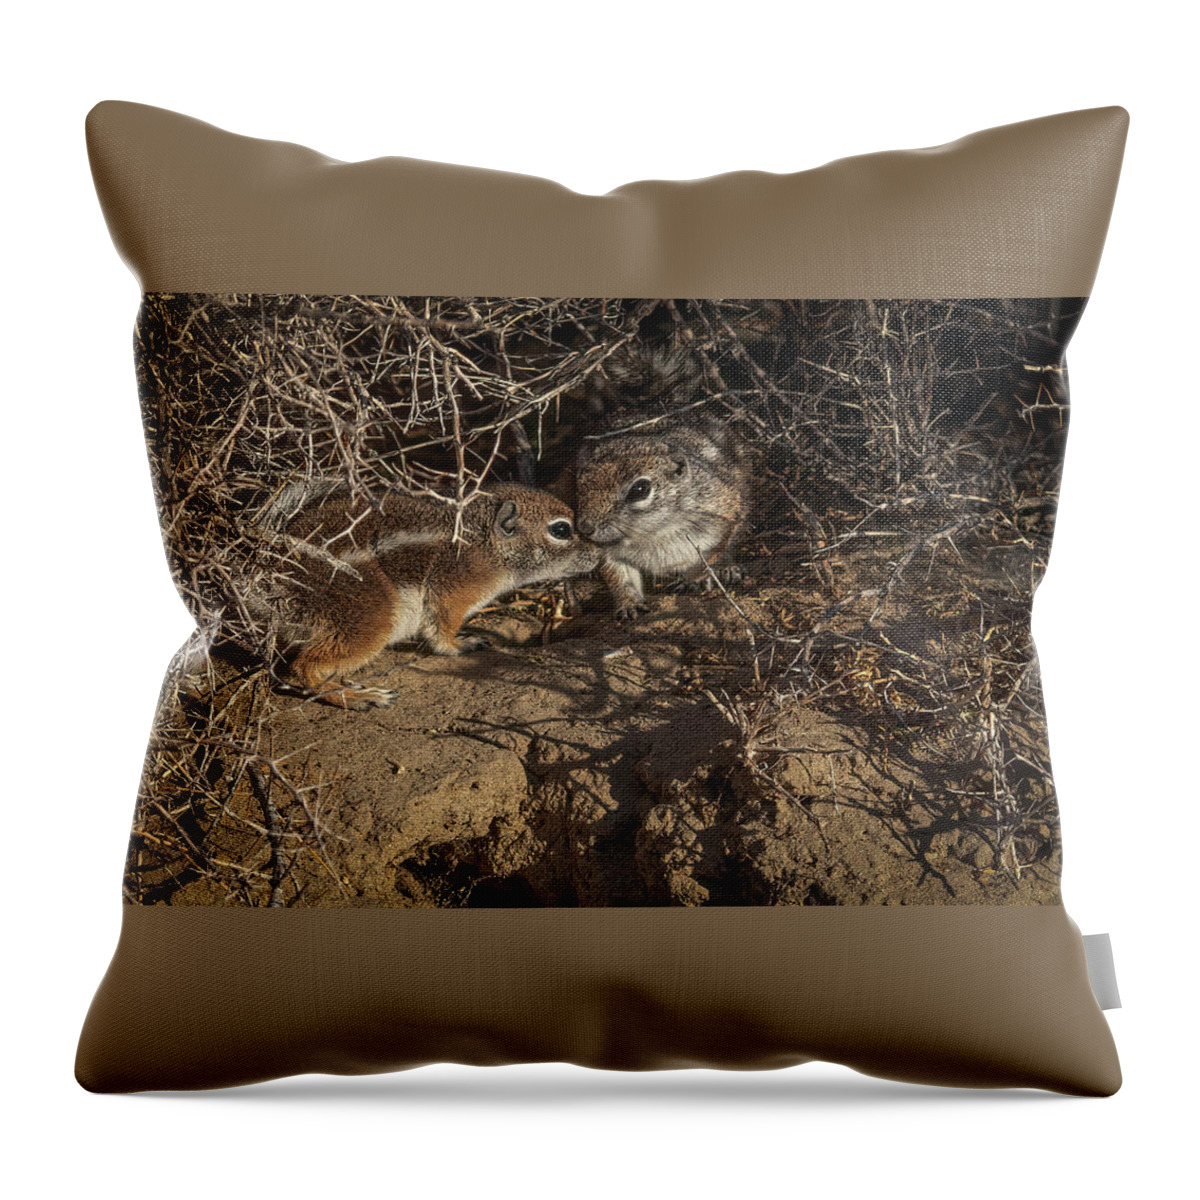 Lahontan Throw Pillow featuring the photograph California Ground Squirrel by Rick Mosher